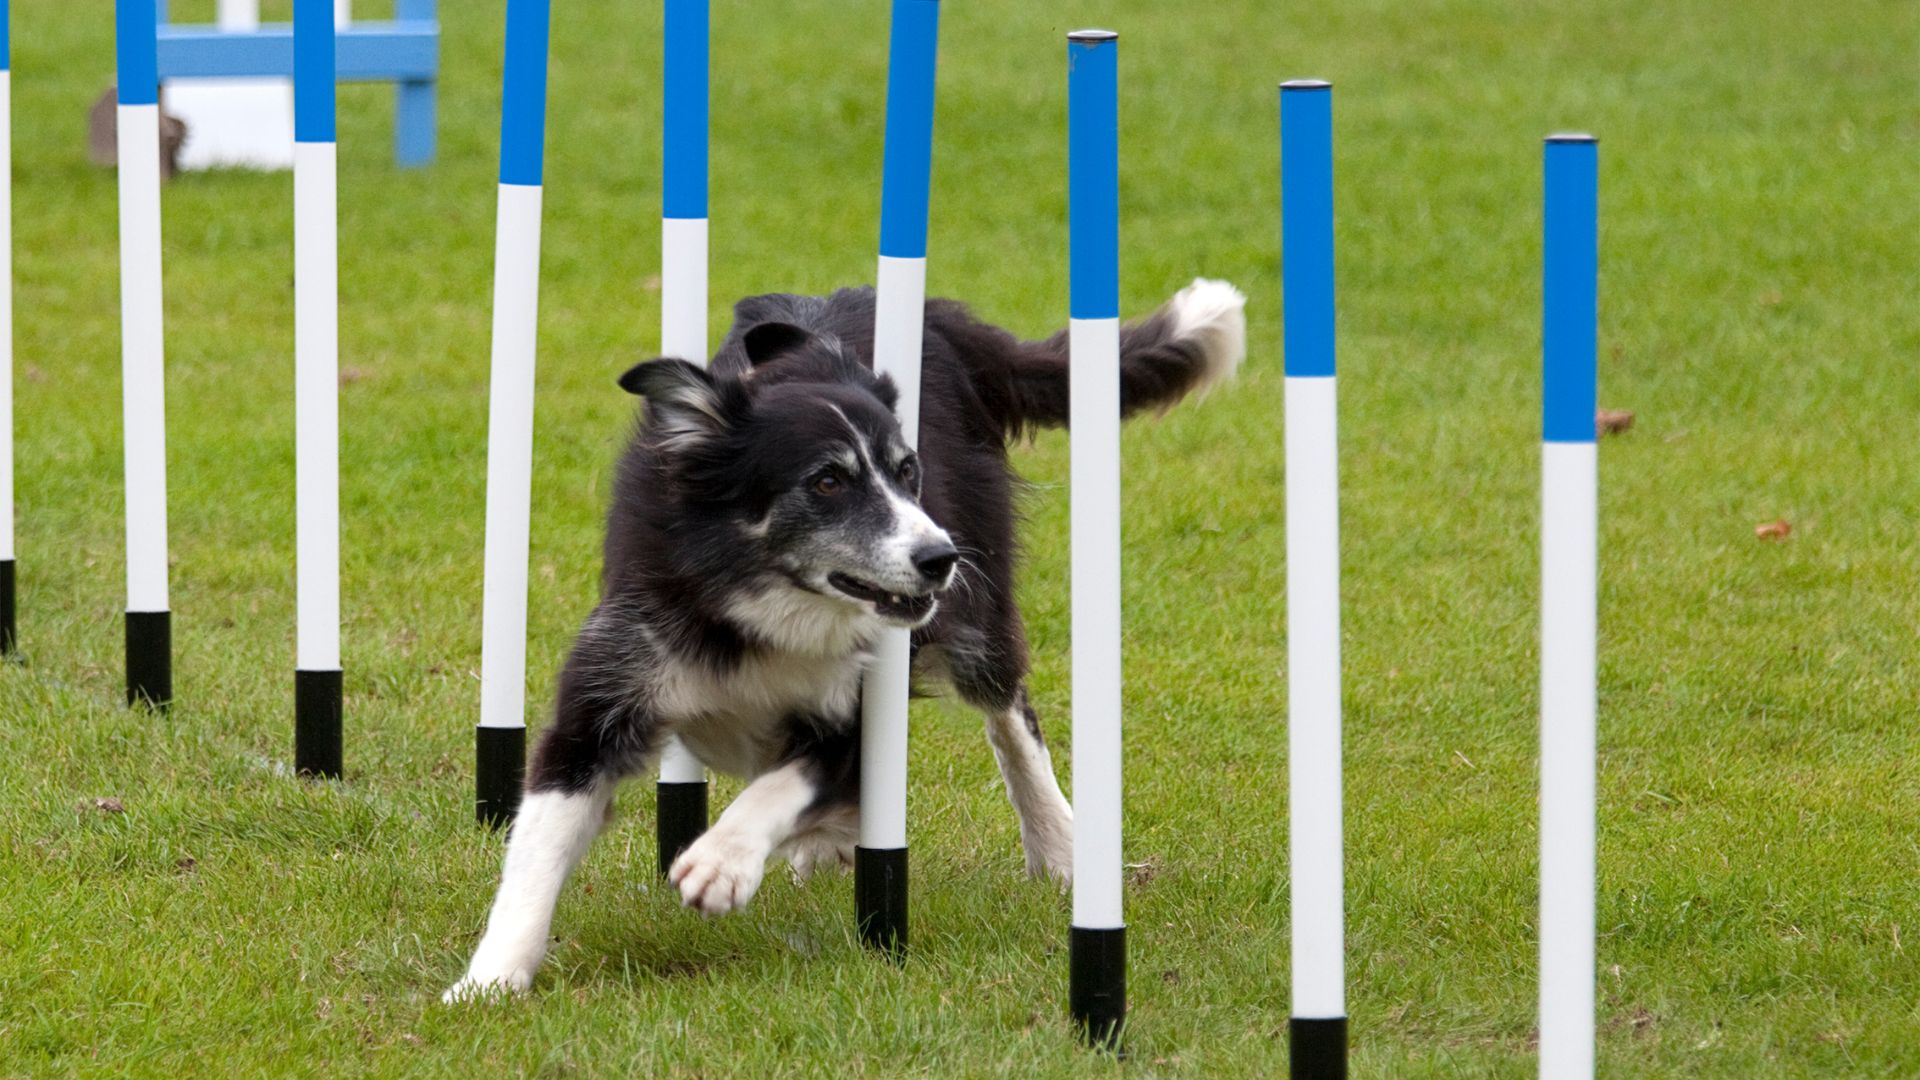 Dog Sports: A border collie completing an agility course. 